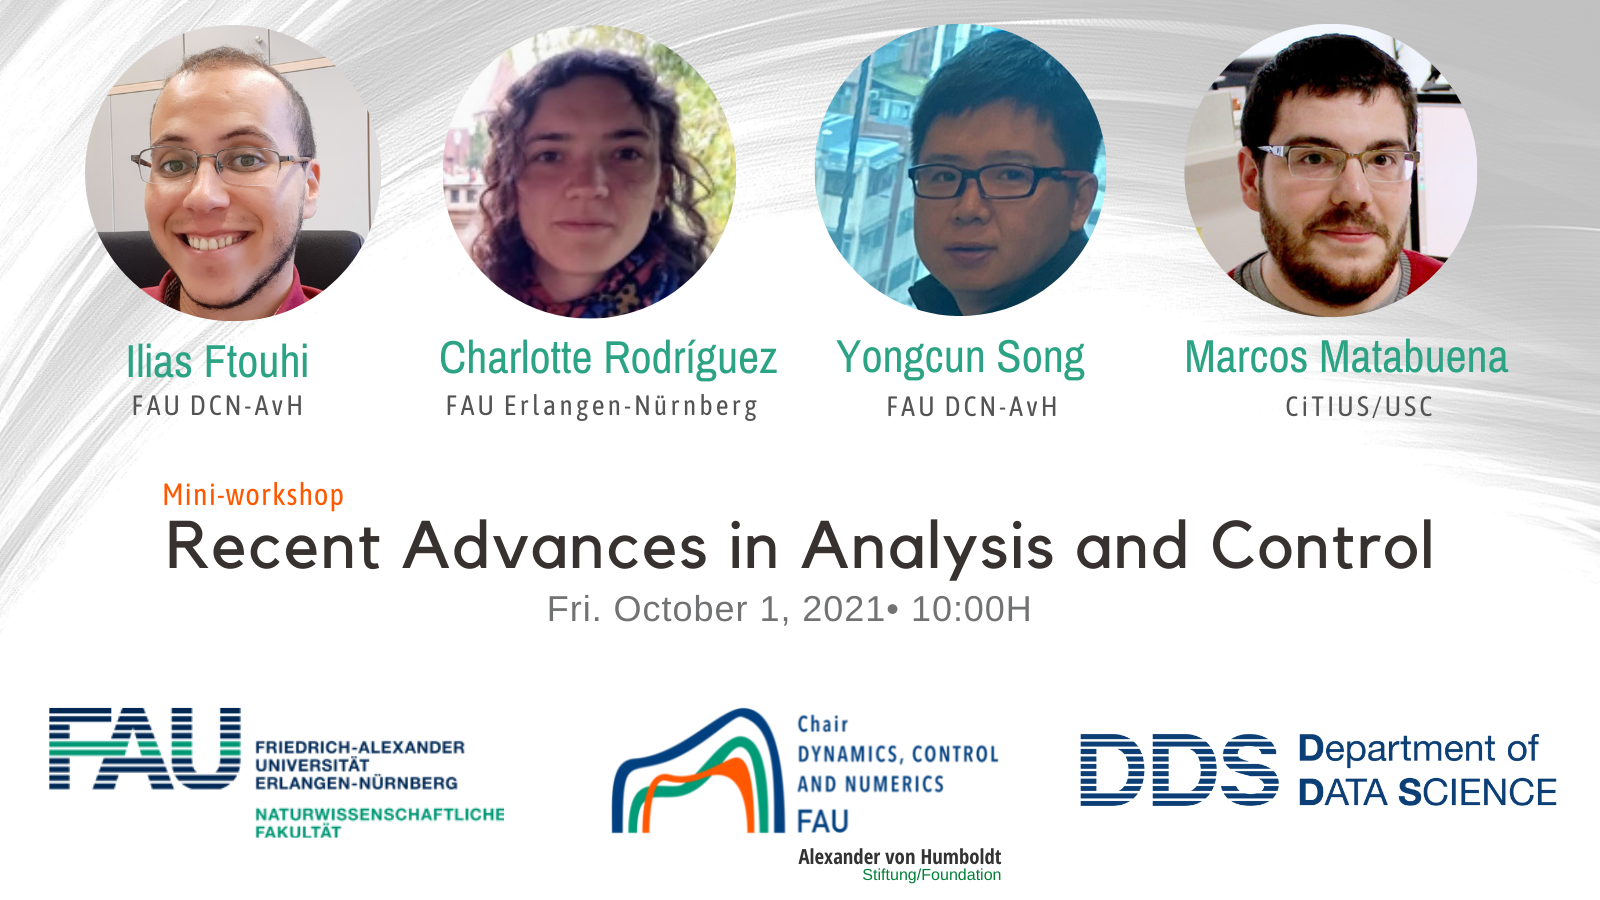 Mini-workshop: “Recent Advances in Analysis and Control”